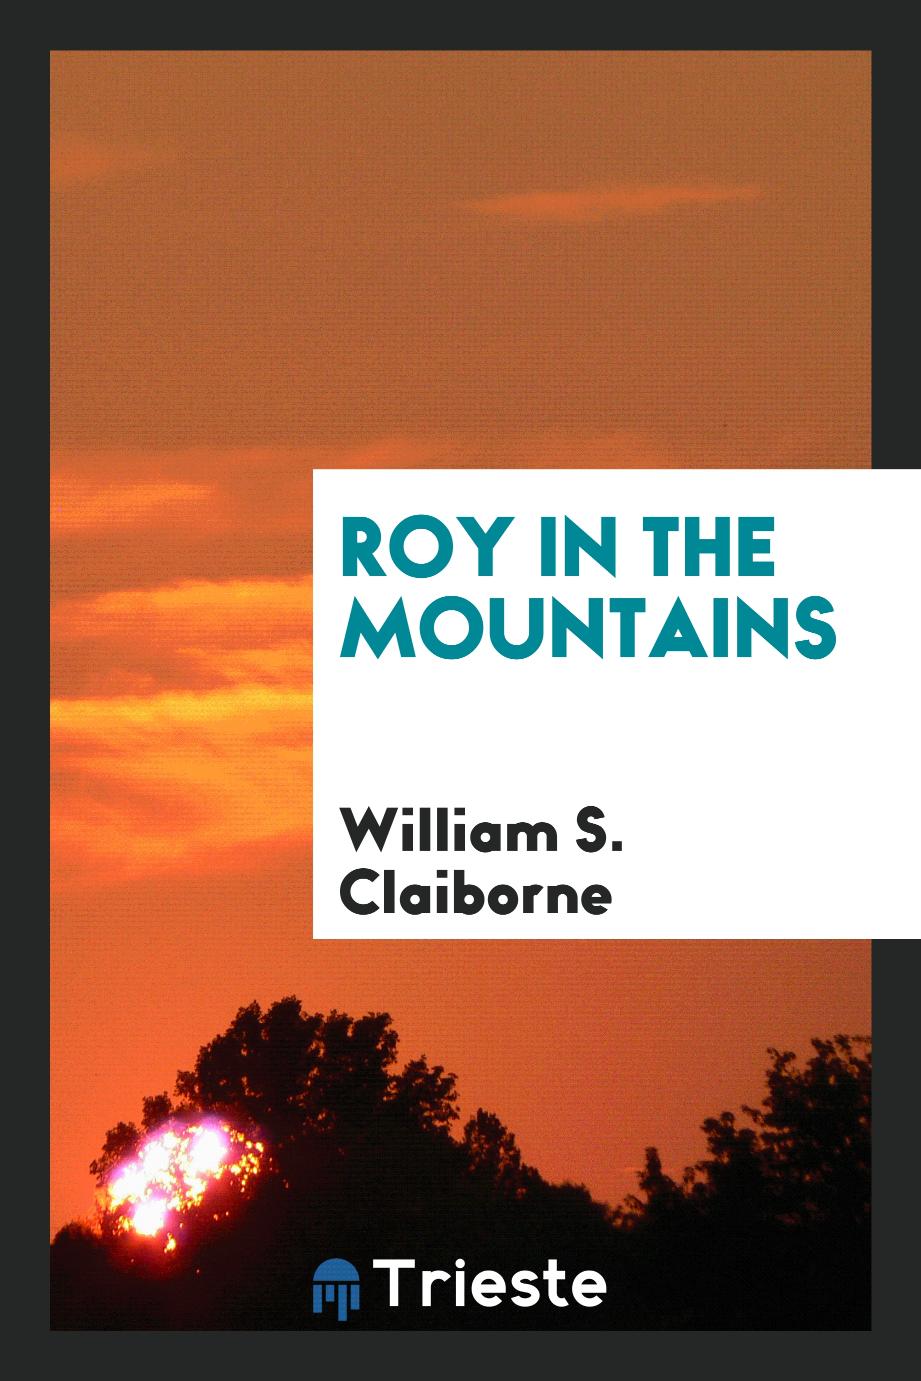 Roy in the mountains